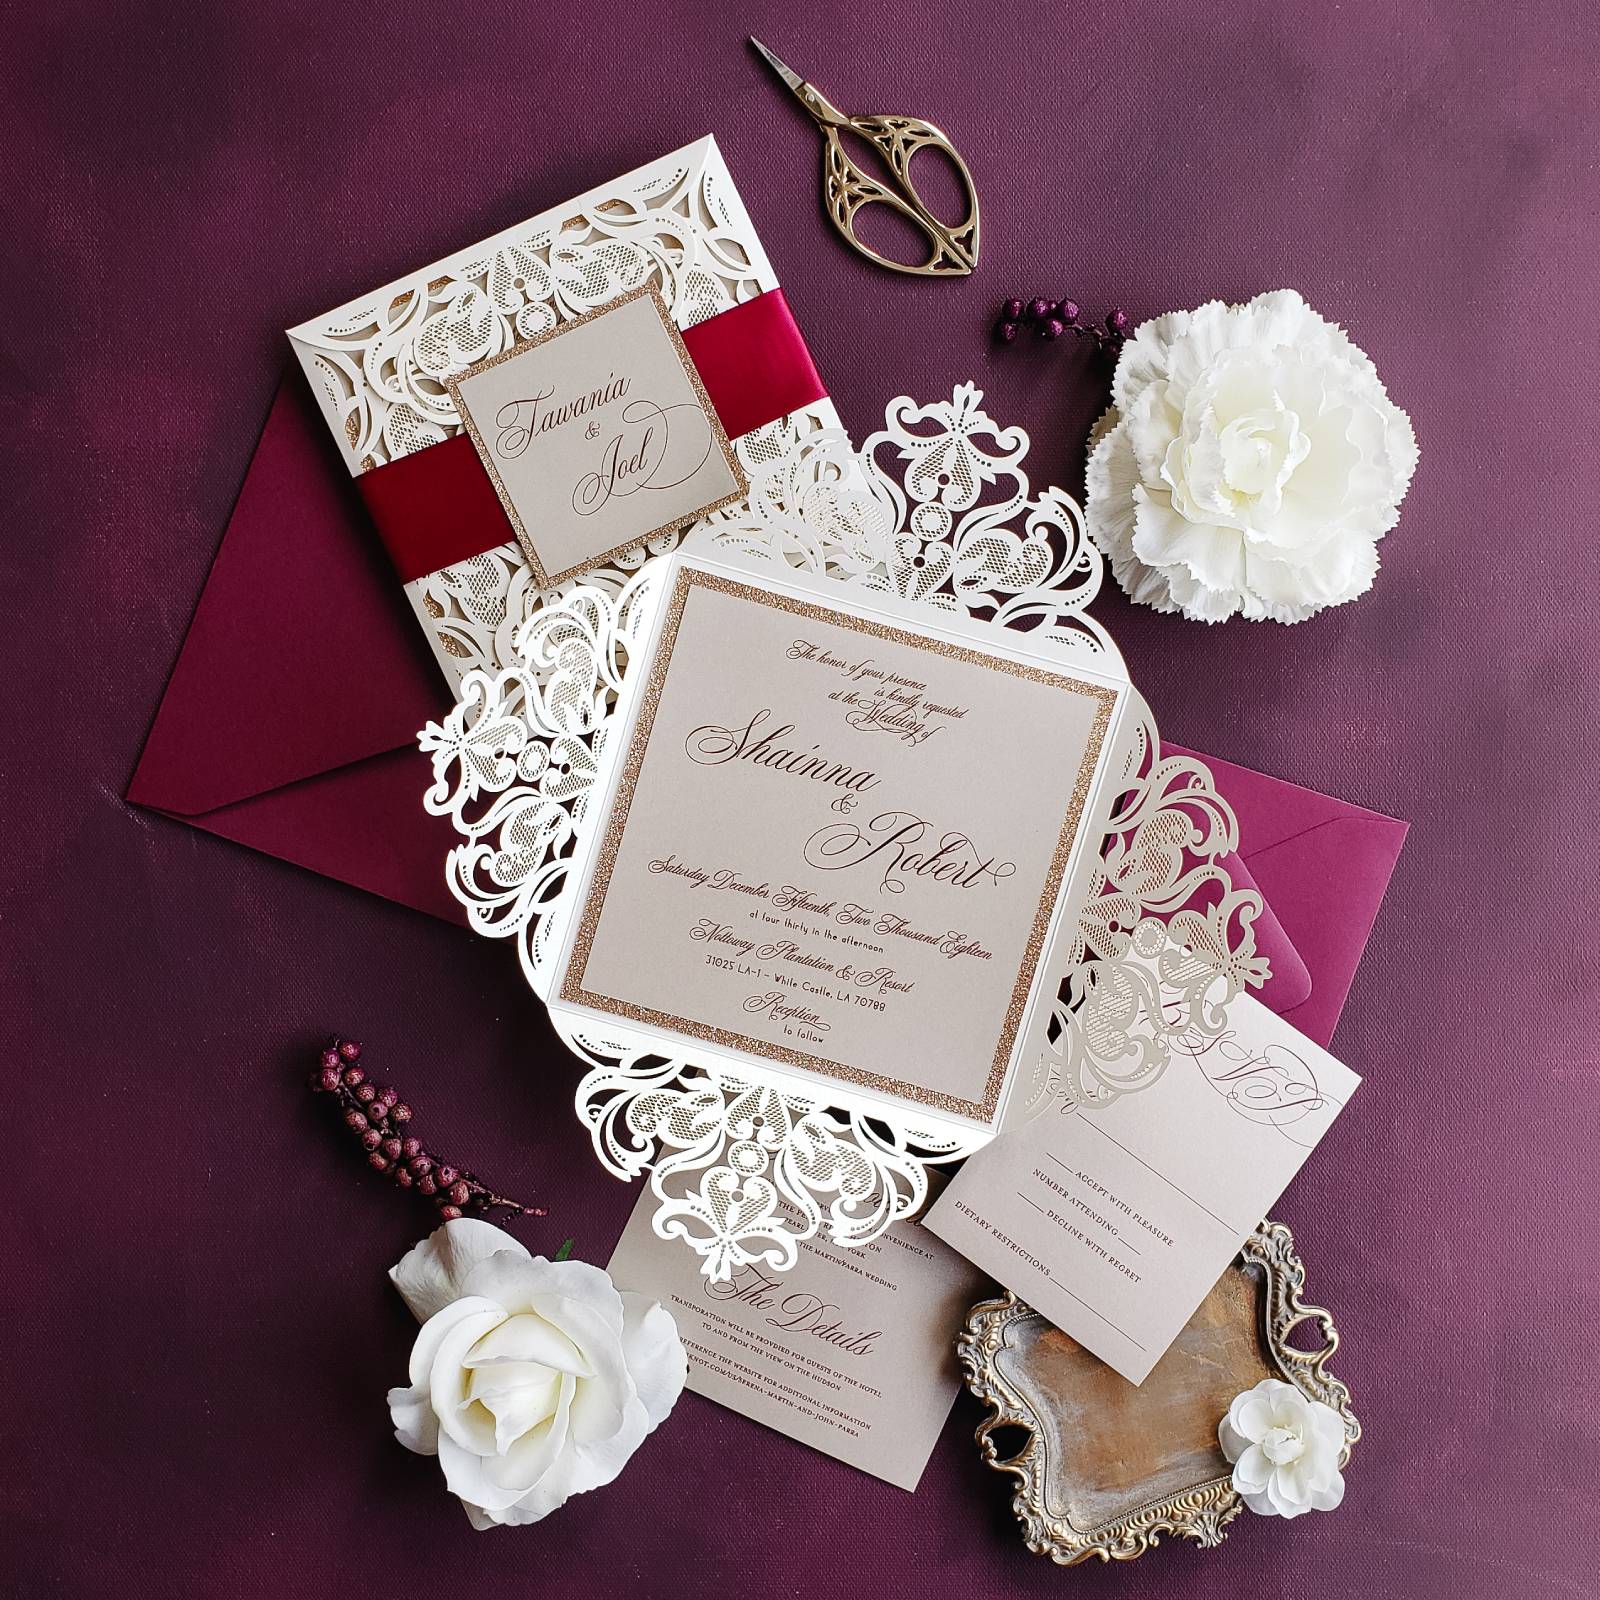 [vc_row][vc_column][vc_column_text]Purchase this listing to get a sample of our Cozy wedding invitation suite.

The sample includes:

• 6